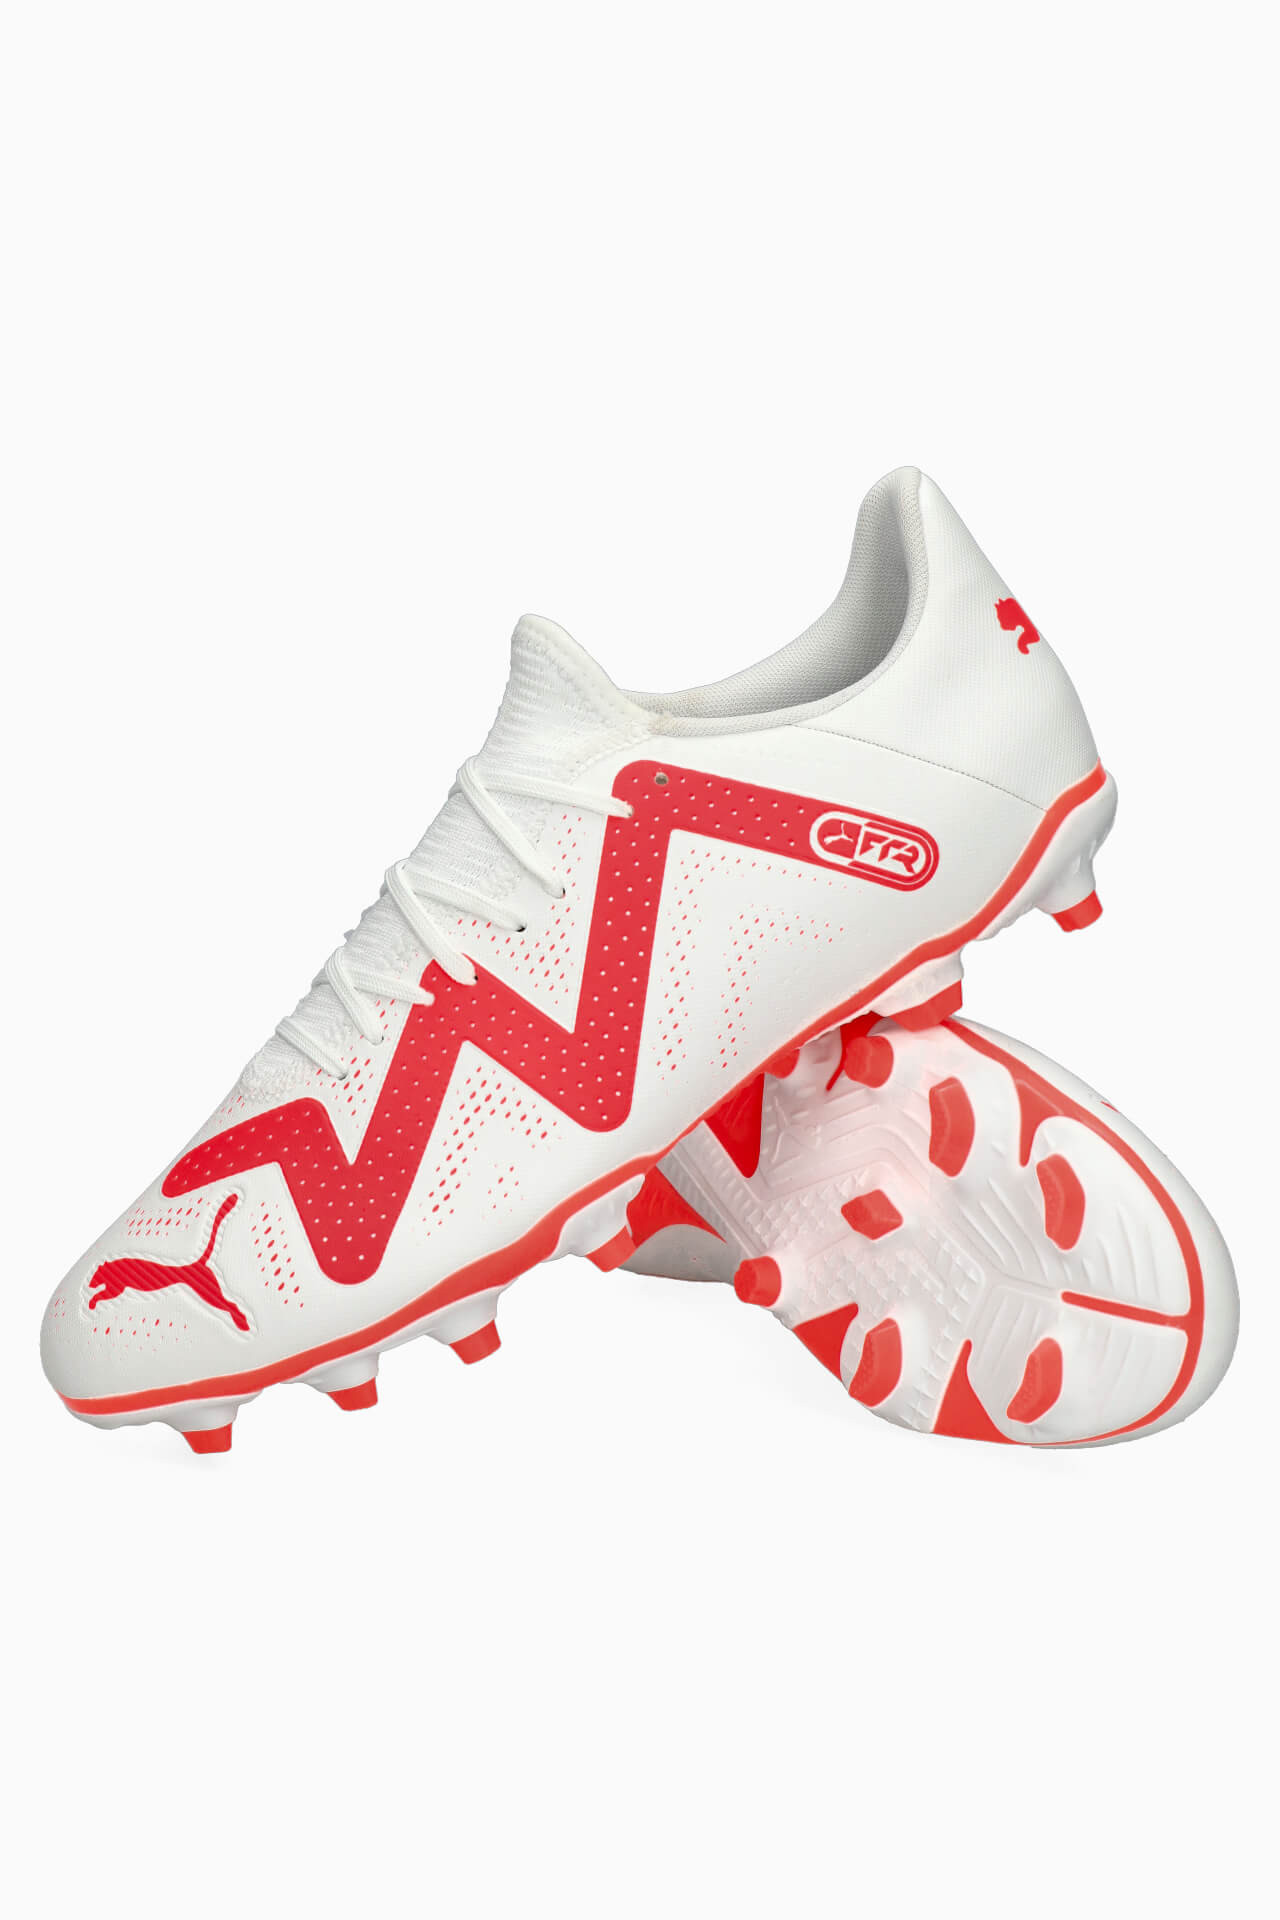 FUTURE PLAY FG/AG Men's Soccer Cleats